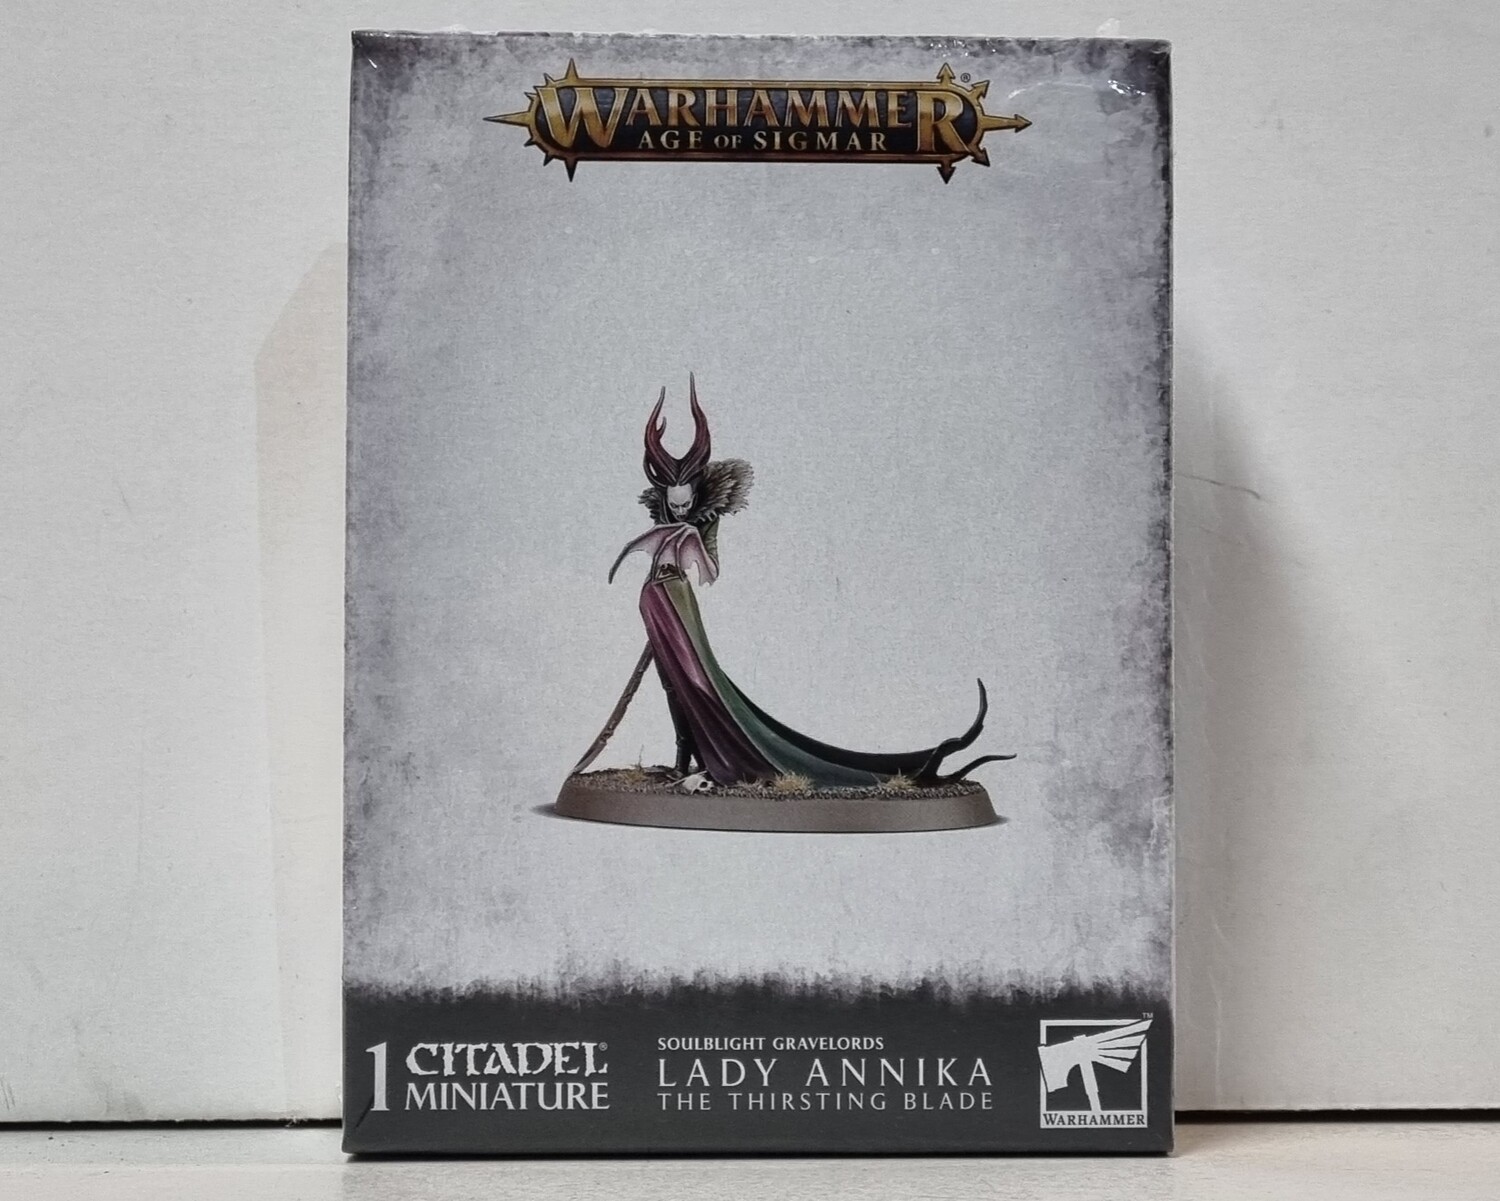 Warhammer Age of Sigmar, Soulblight Gravelords: Lady Annika